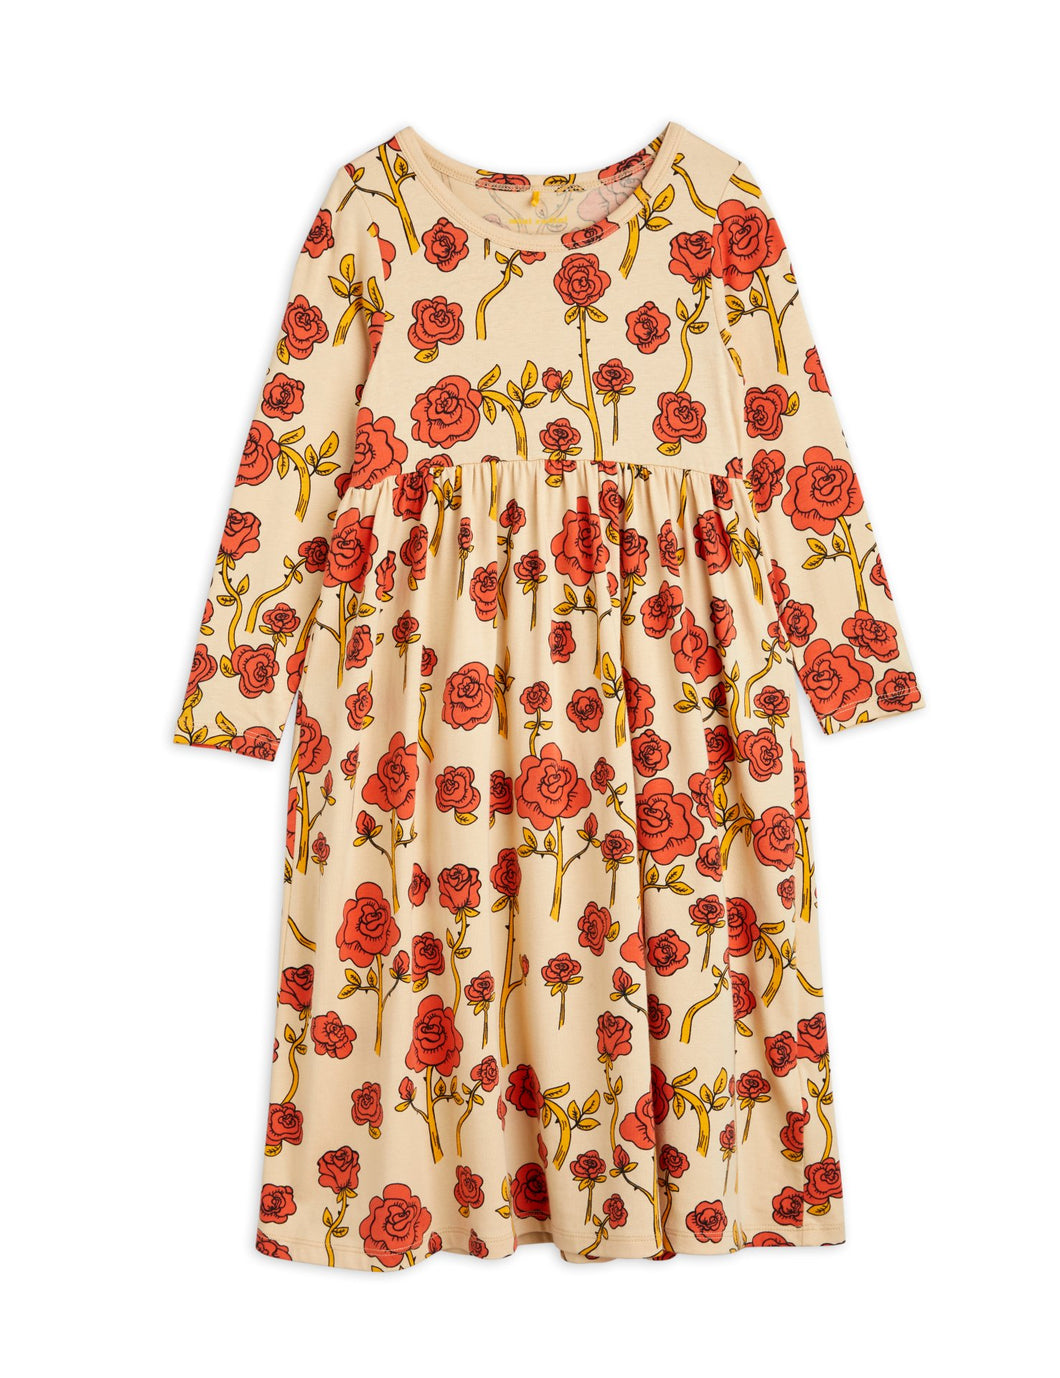 Roses Dress - Red